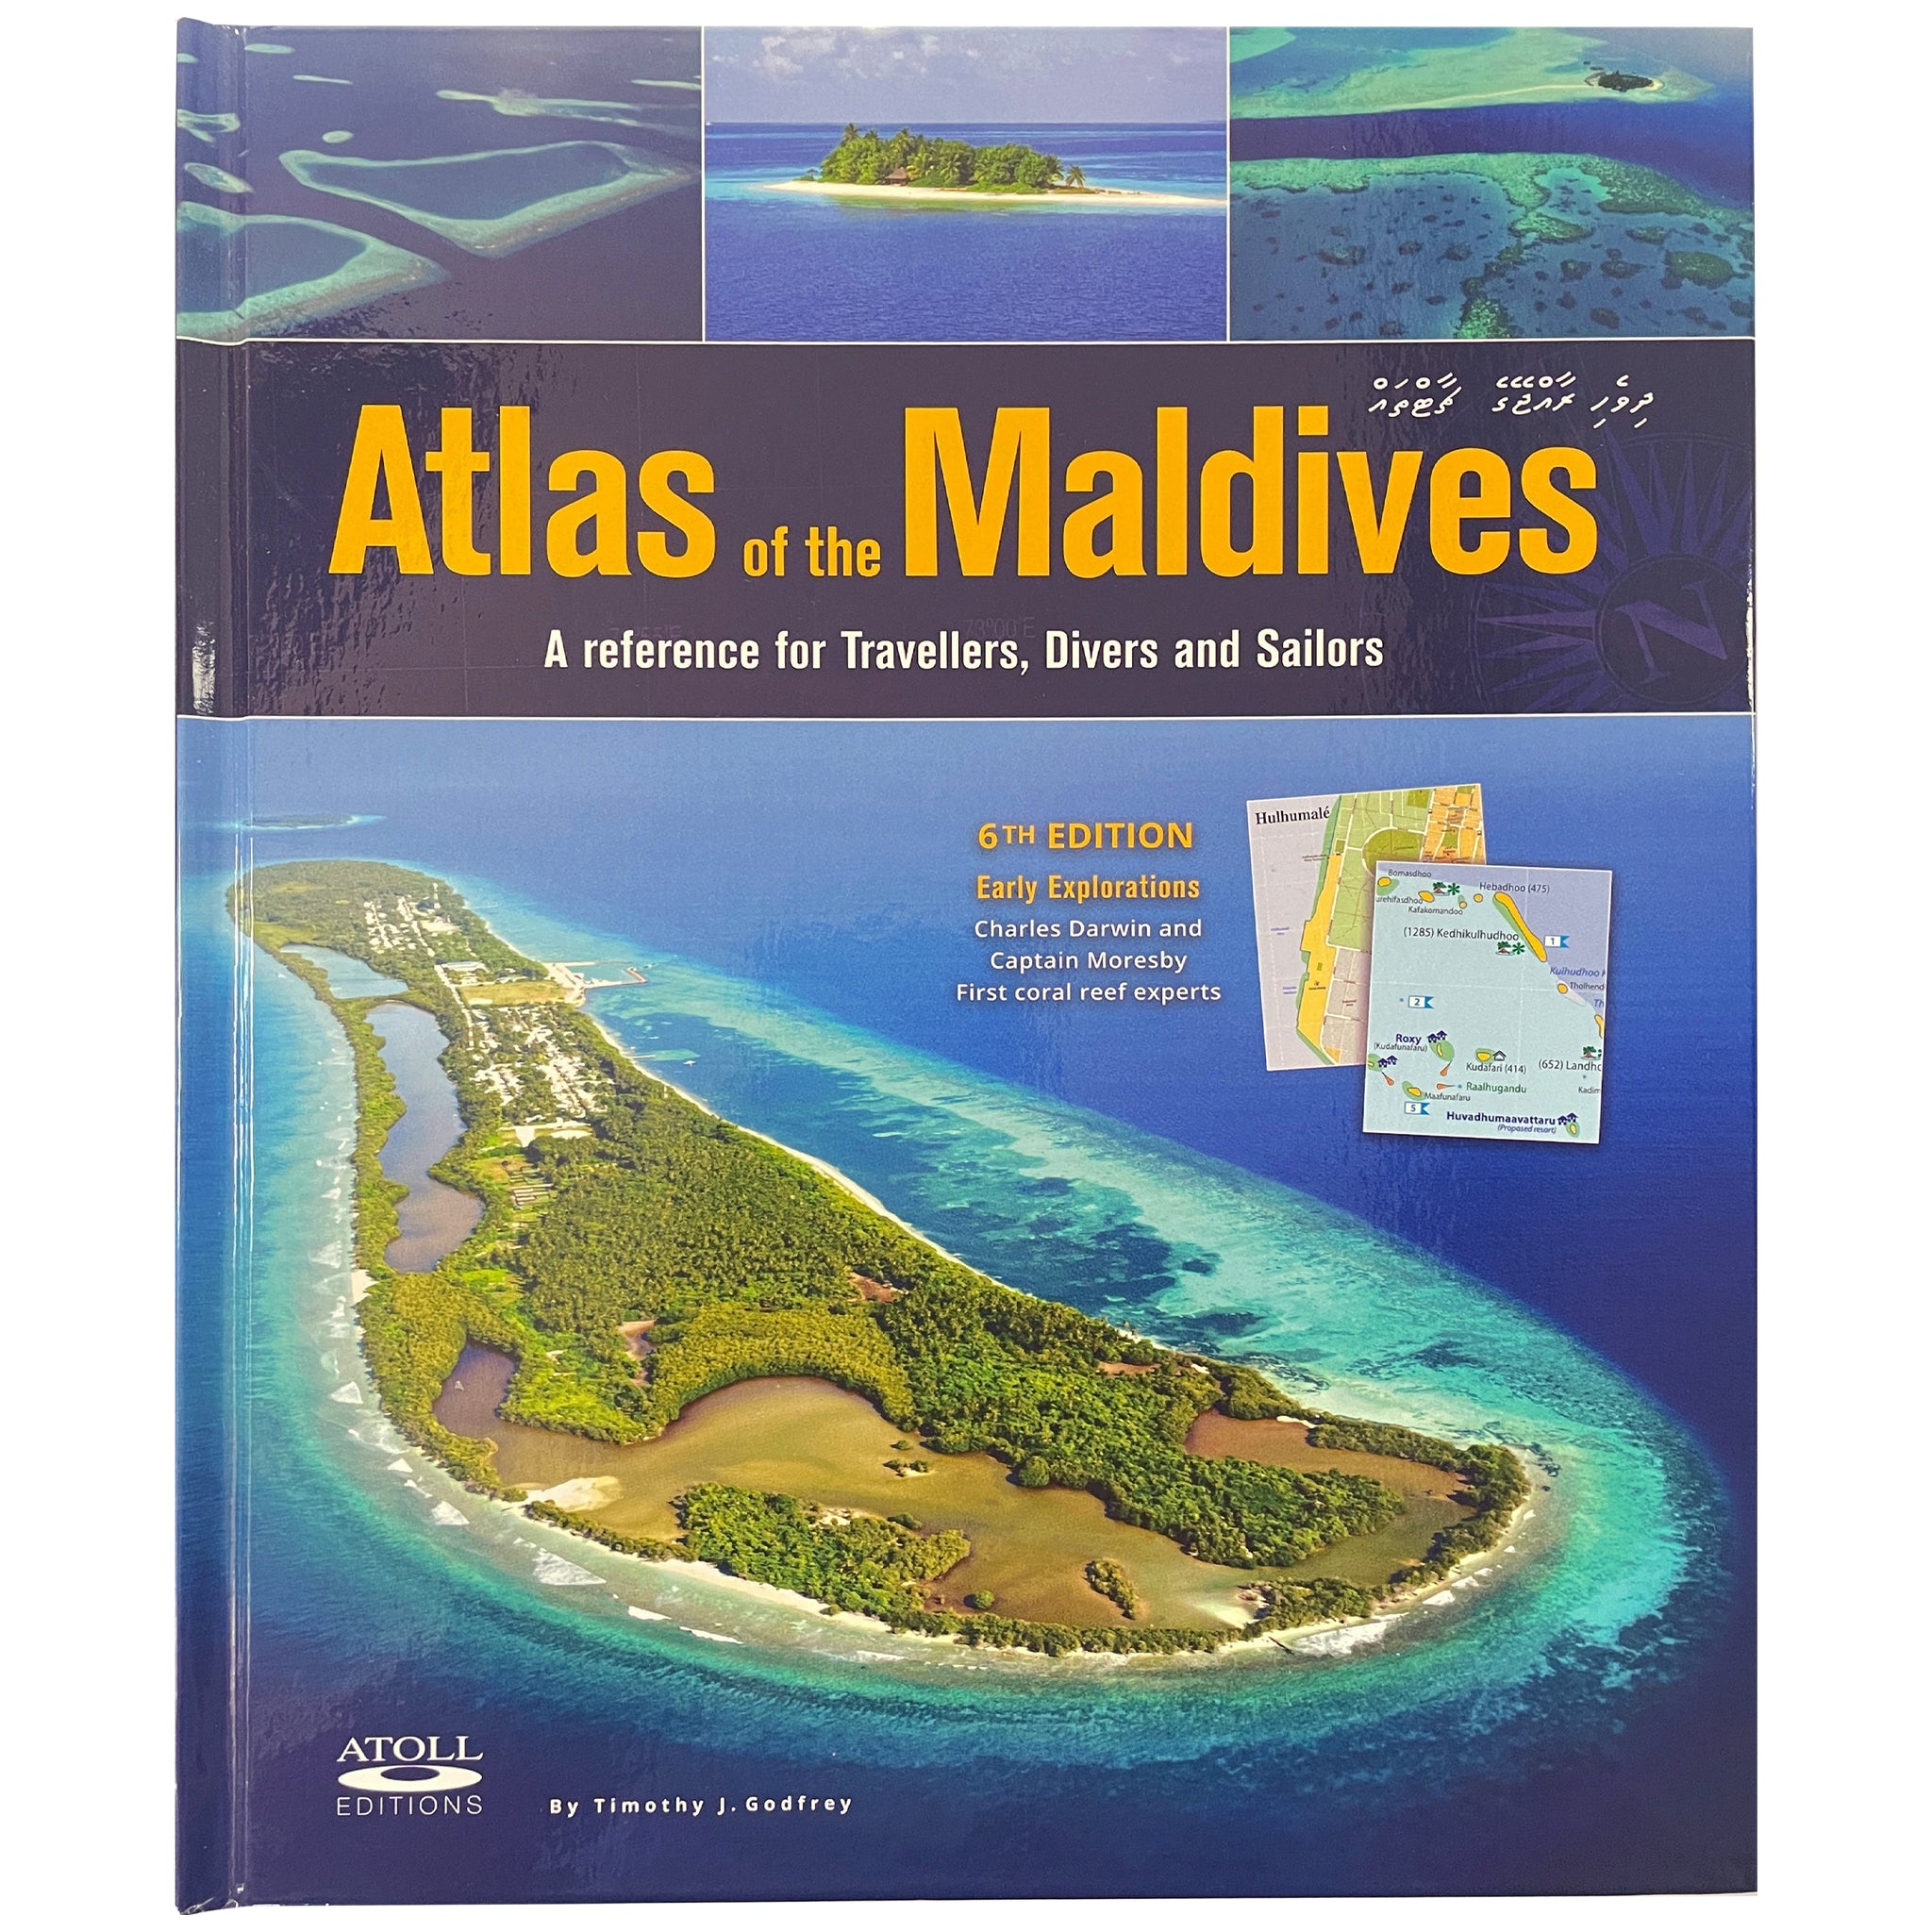 Atlas of the Maldives for Travellers, Divers & Sailors